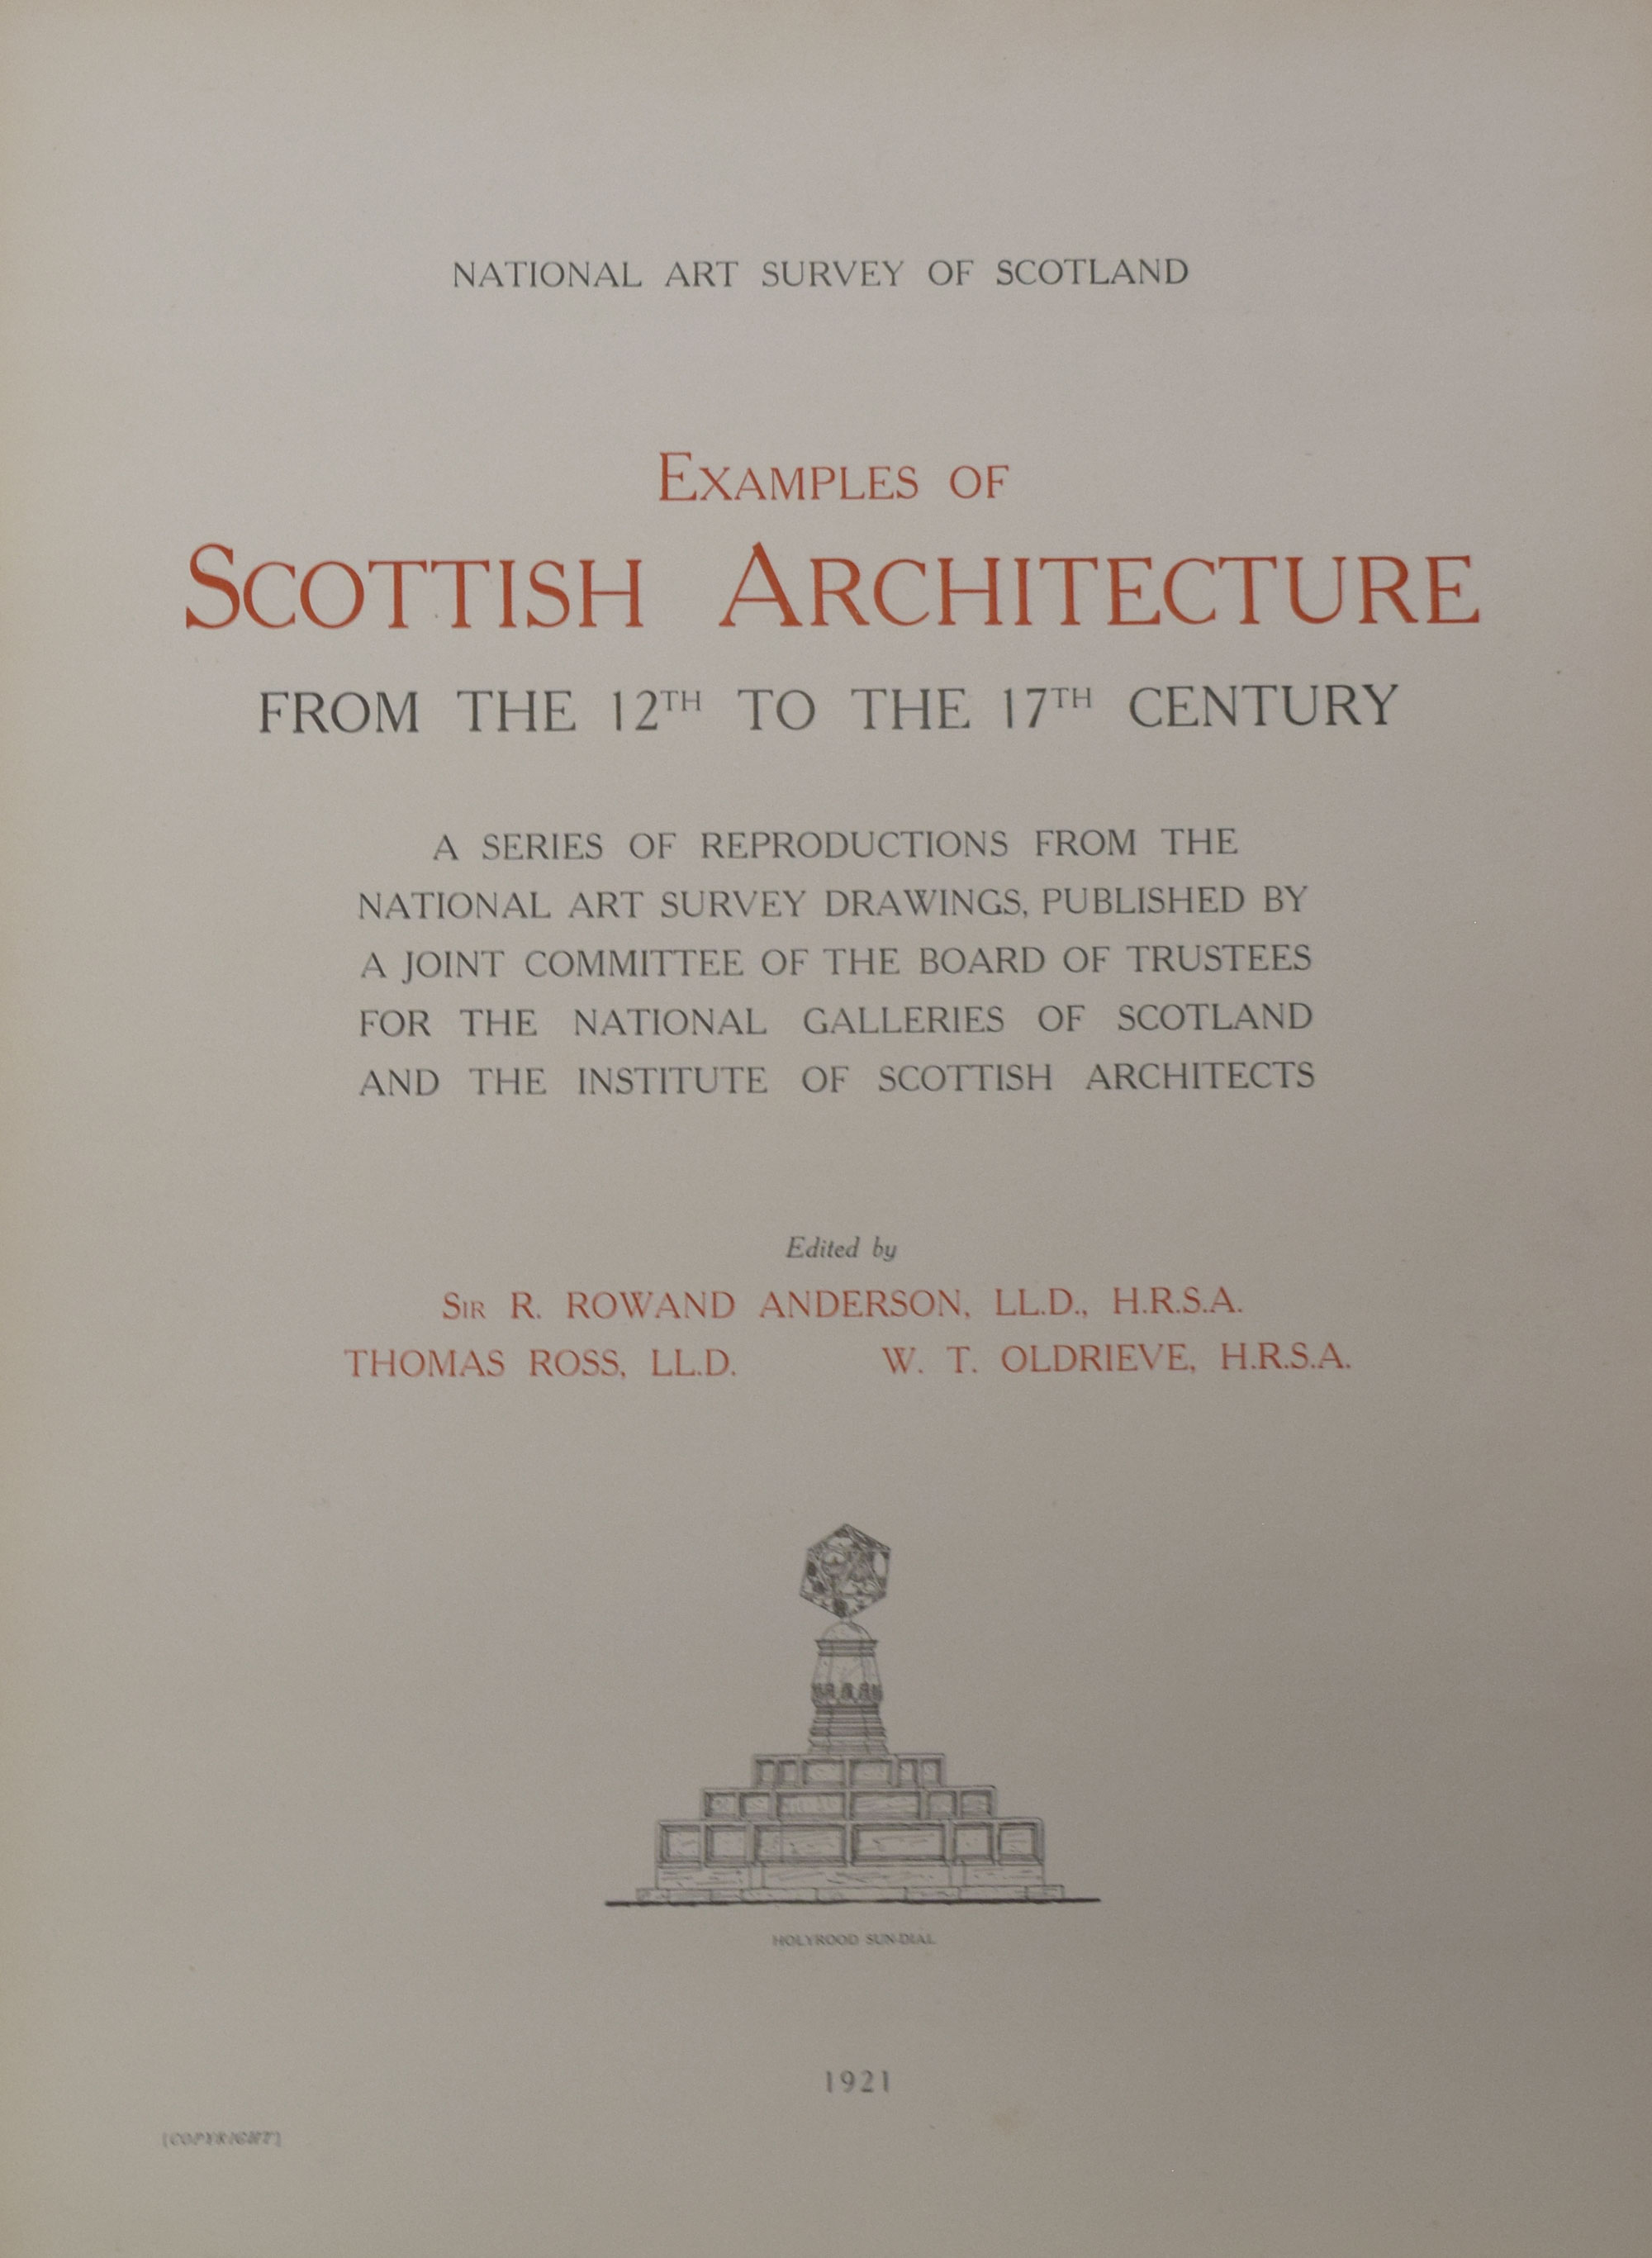 Examples of Scottish Architecture from the 12th to the 17th Centuries. National Art Survey of Scotland. Complete 4 volume set.